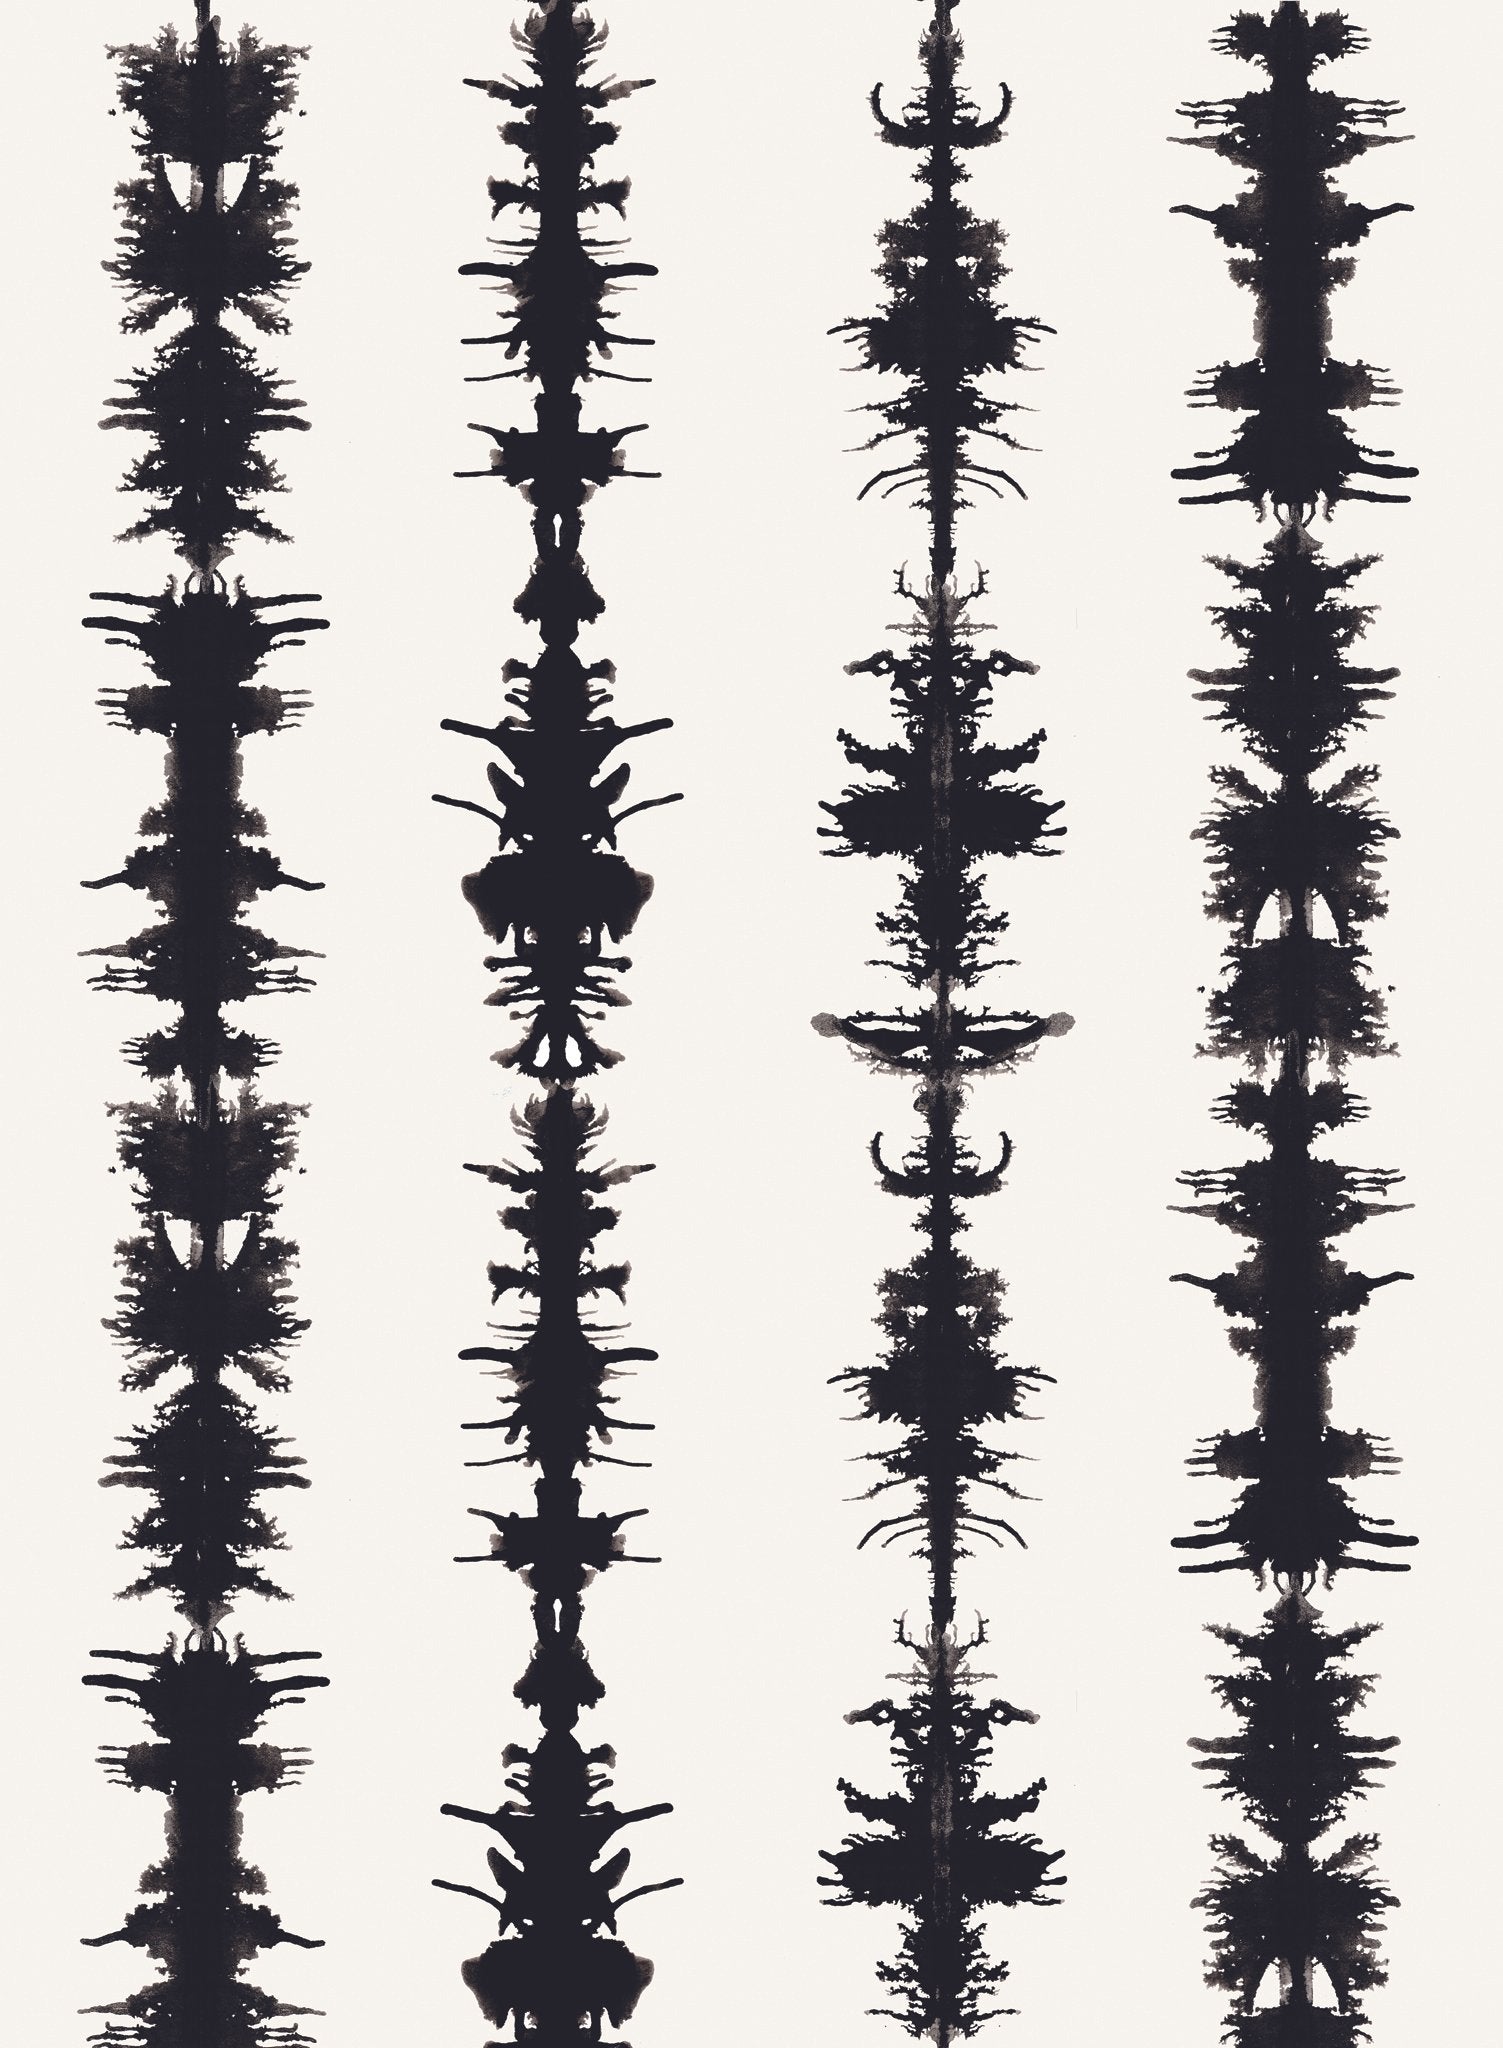 Sound of Silence is a minimalist wallpaper by Opposite Wall of different sound waves aligned vertically.